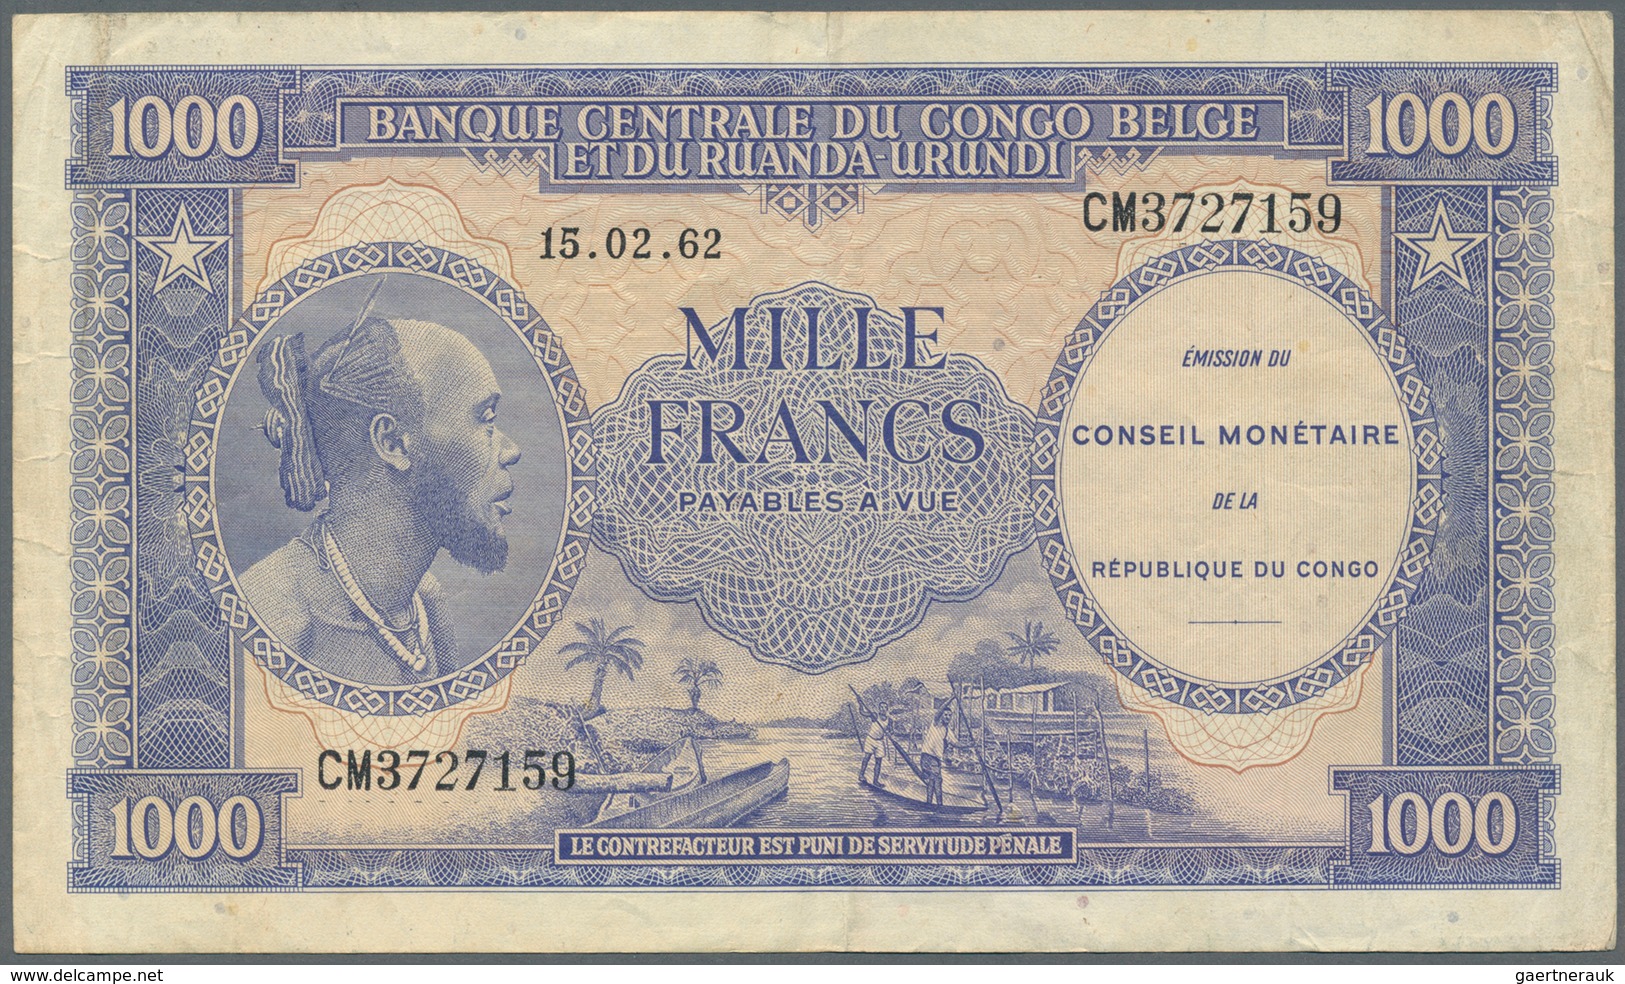 01317 Congo / Kongo: 1000 Francs 1962 P. 2, Used With Folds And Creases, No Holes Or Tears, Still Crispnes - Non Classés